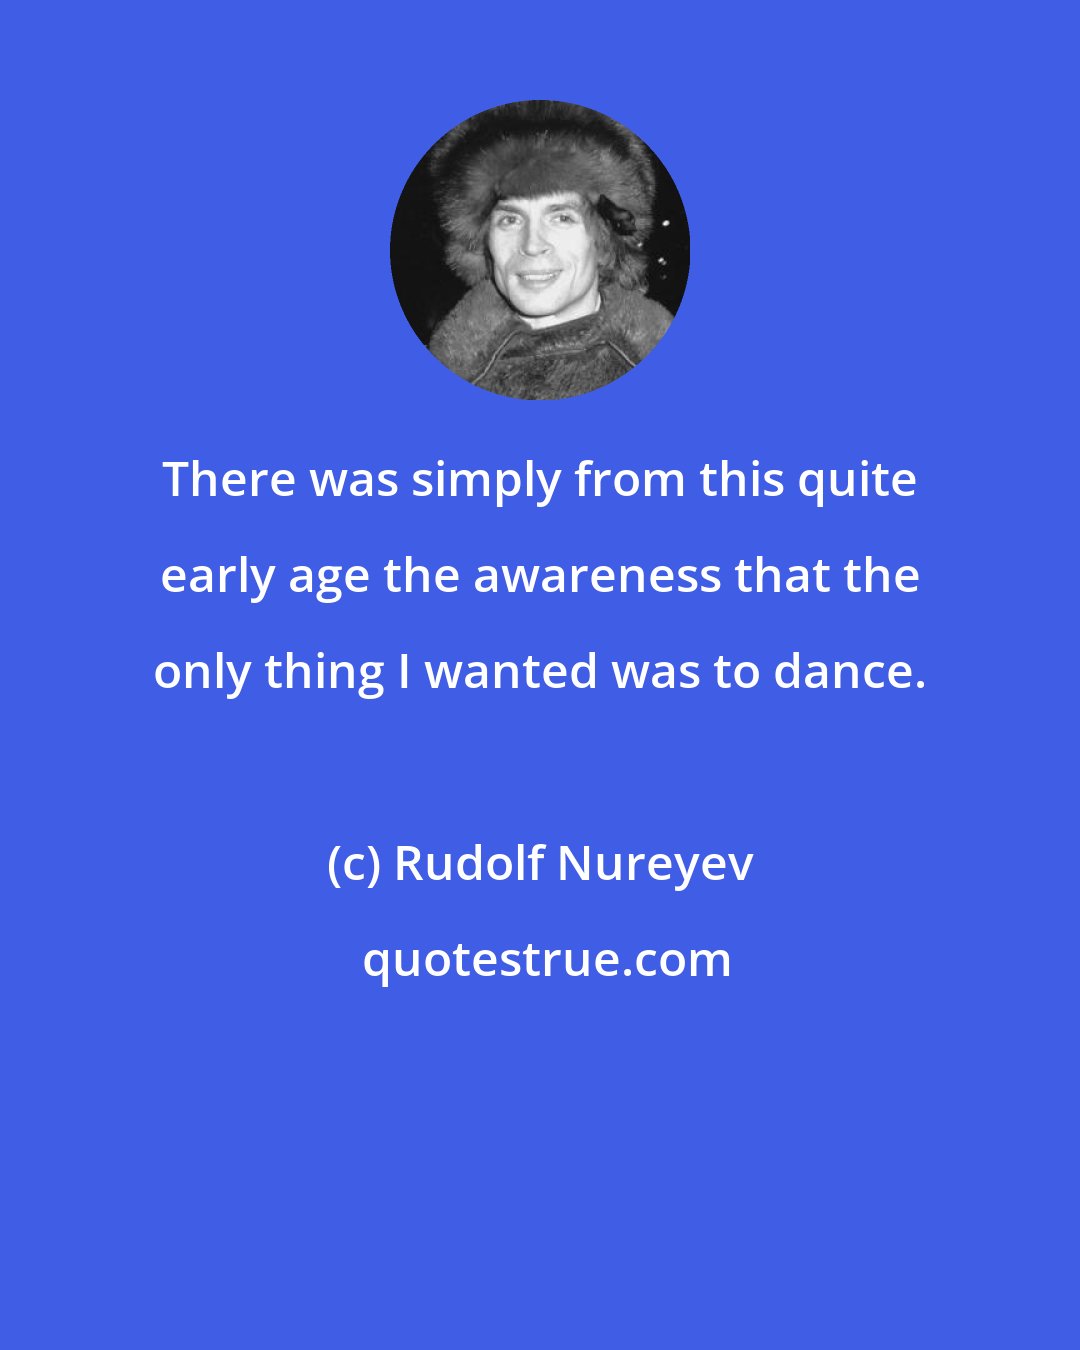 Rudolf Nureyev: There was simply from this quite early age the awareness that the only thing I wanted was to dance.